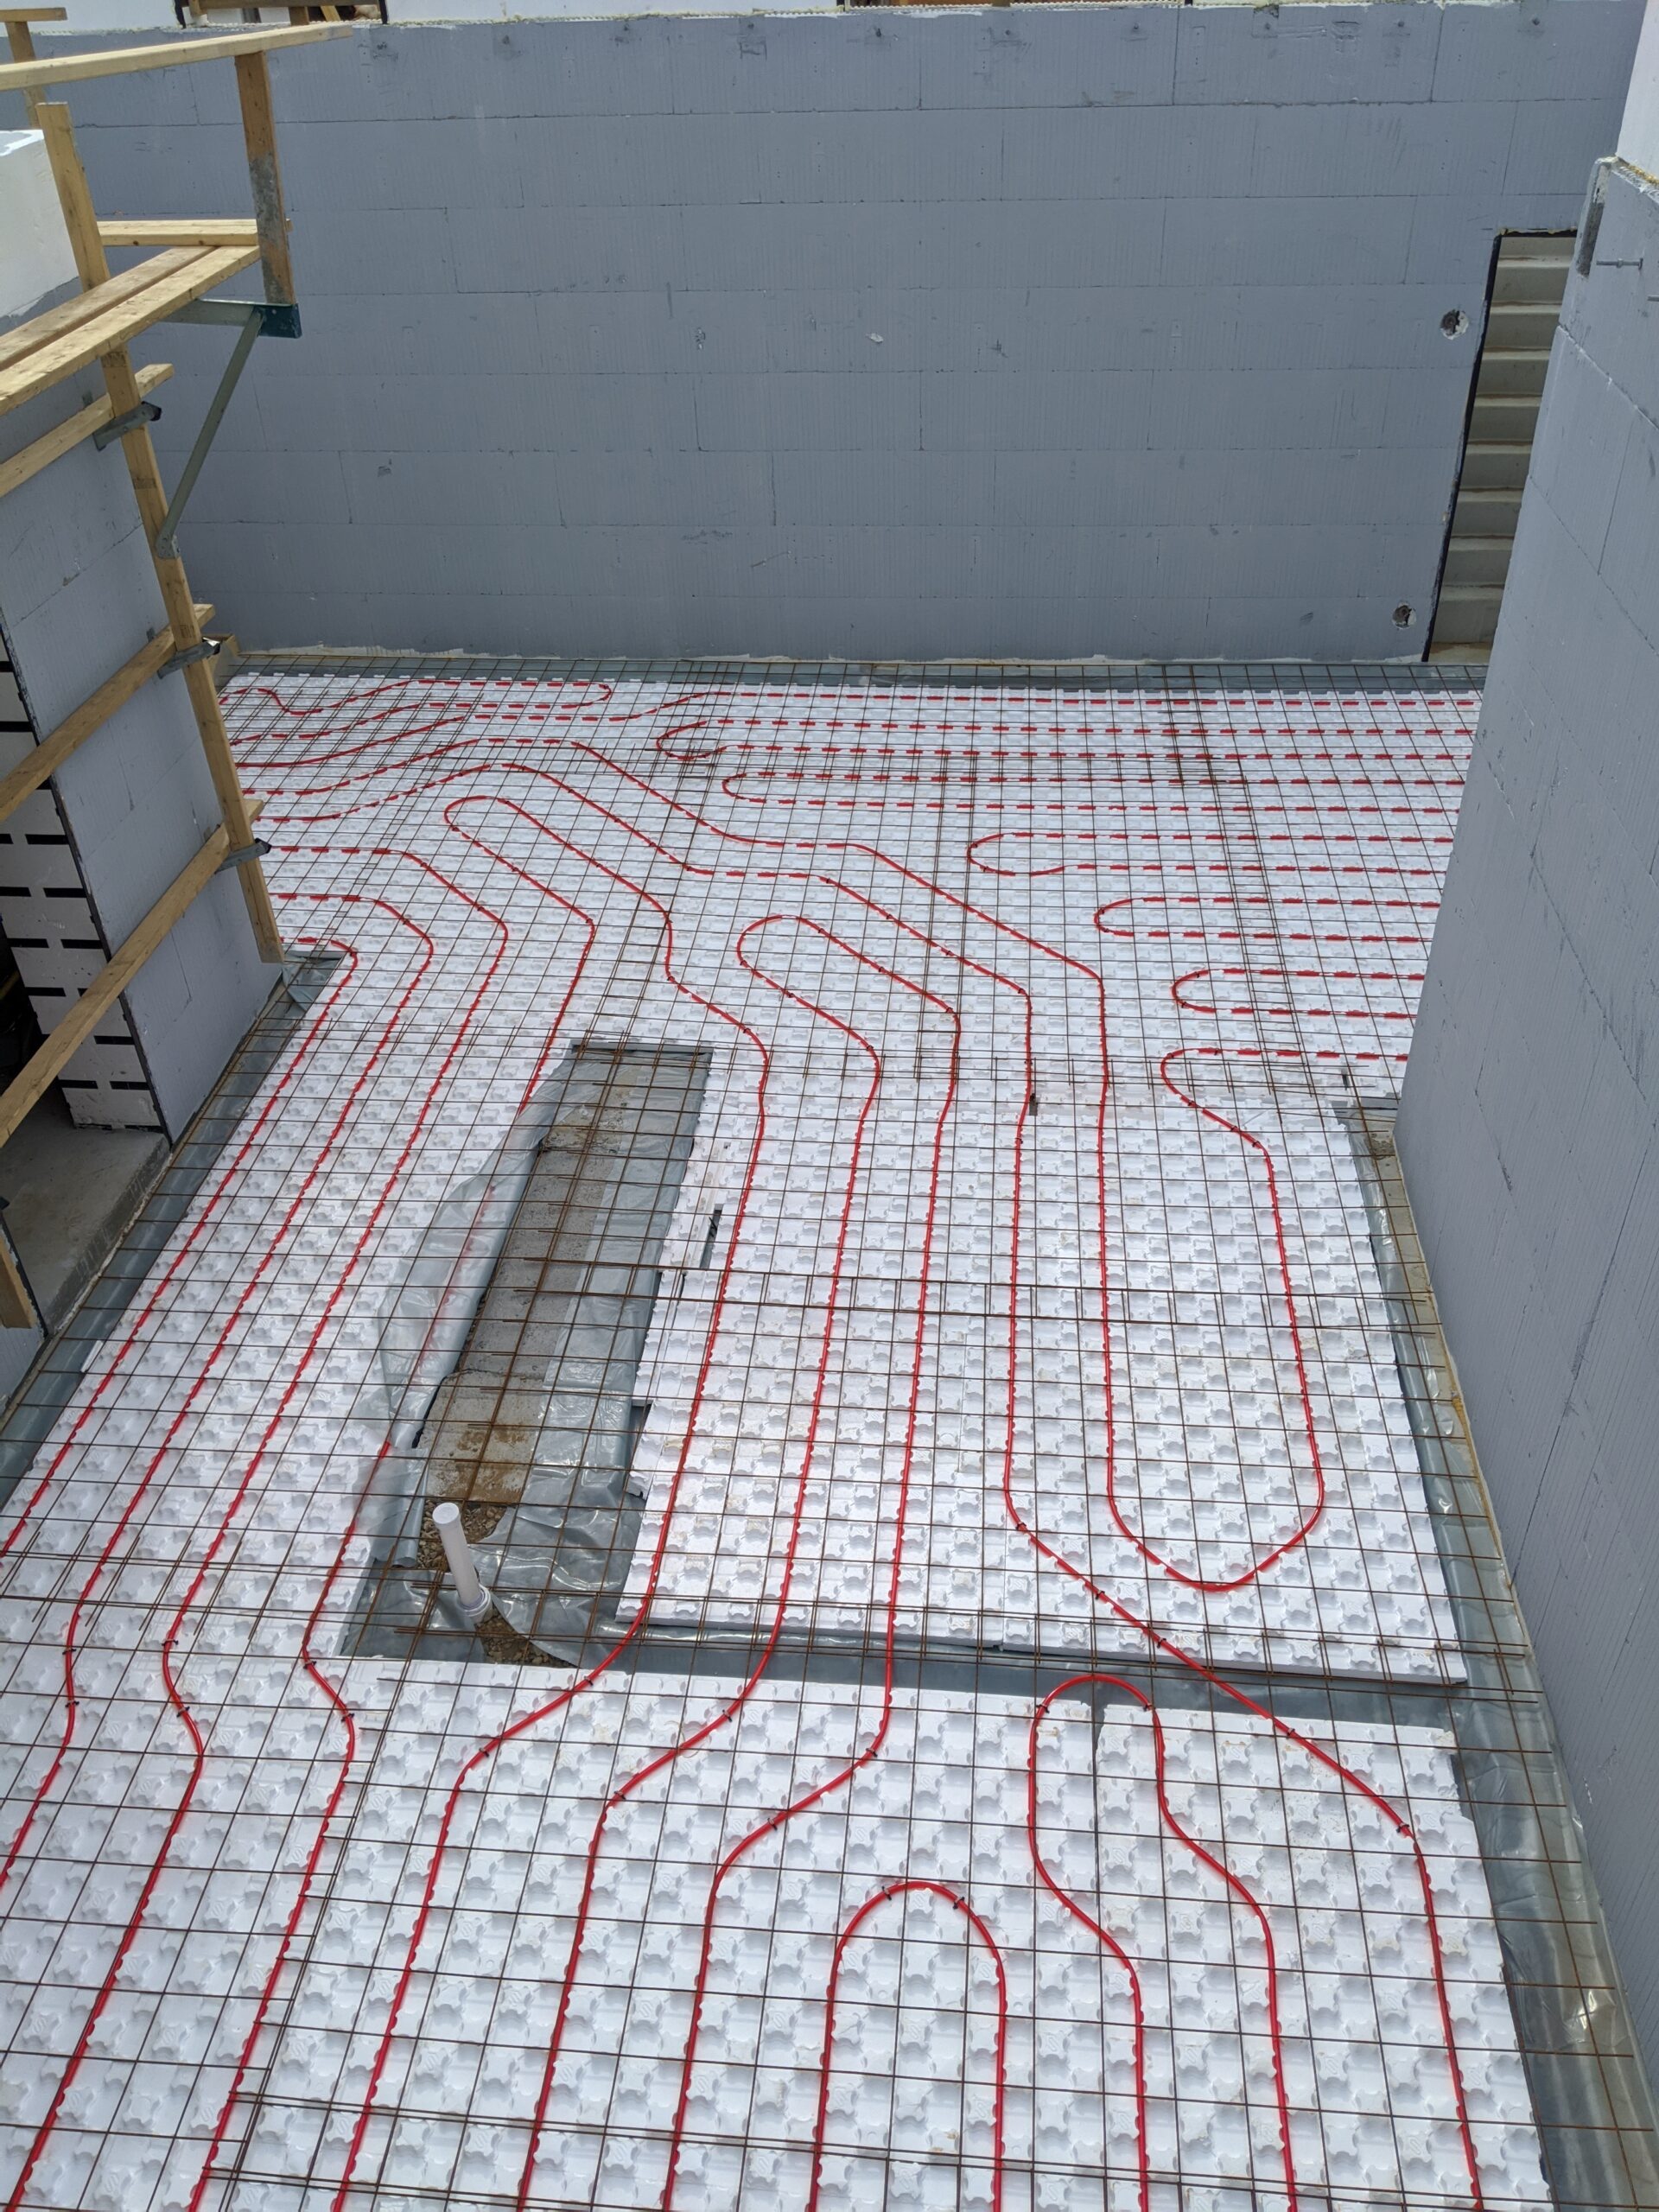 A view of the basement foundation with a radiant heating system within the concrete structure.